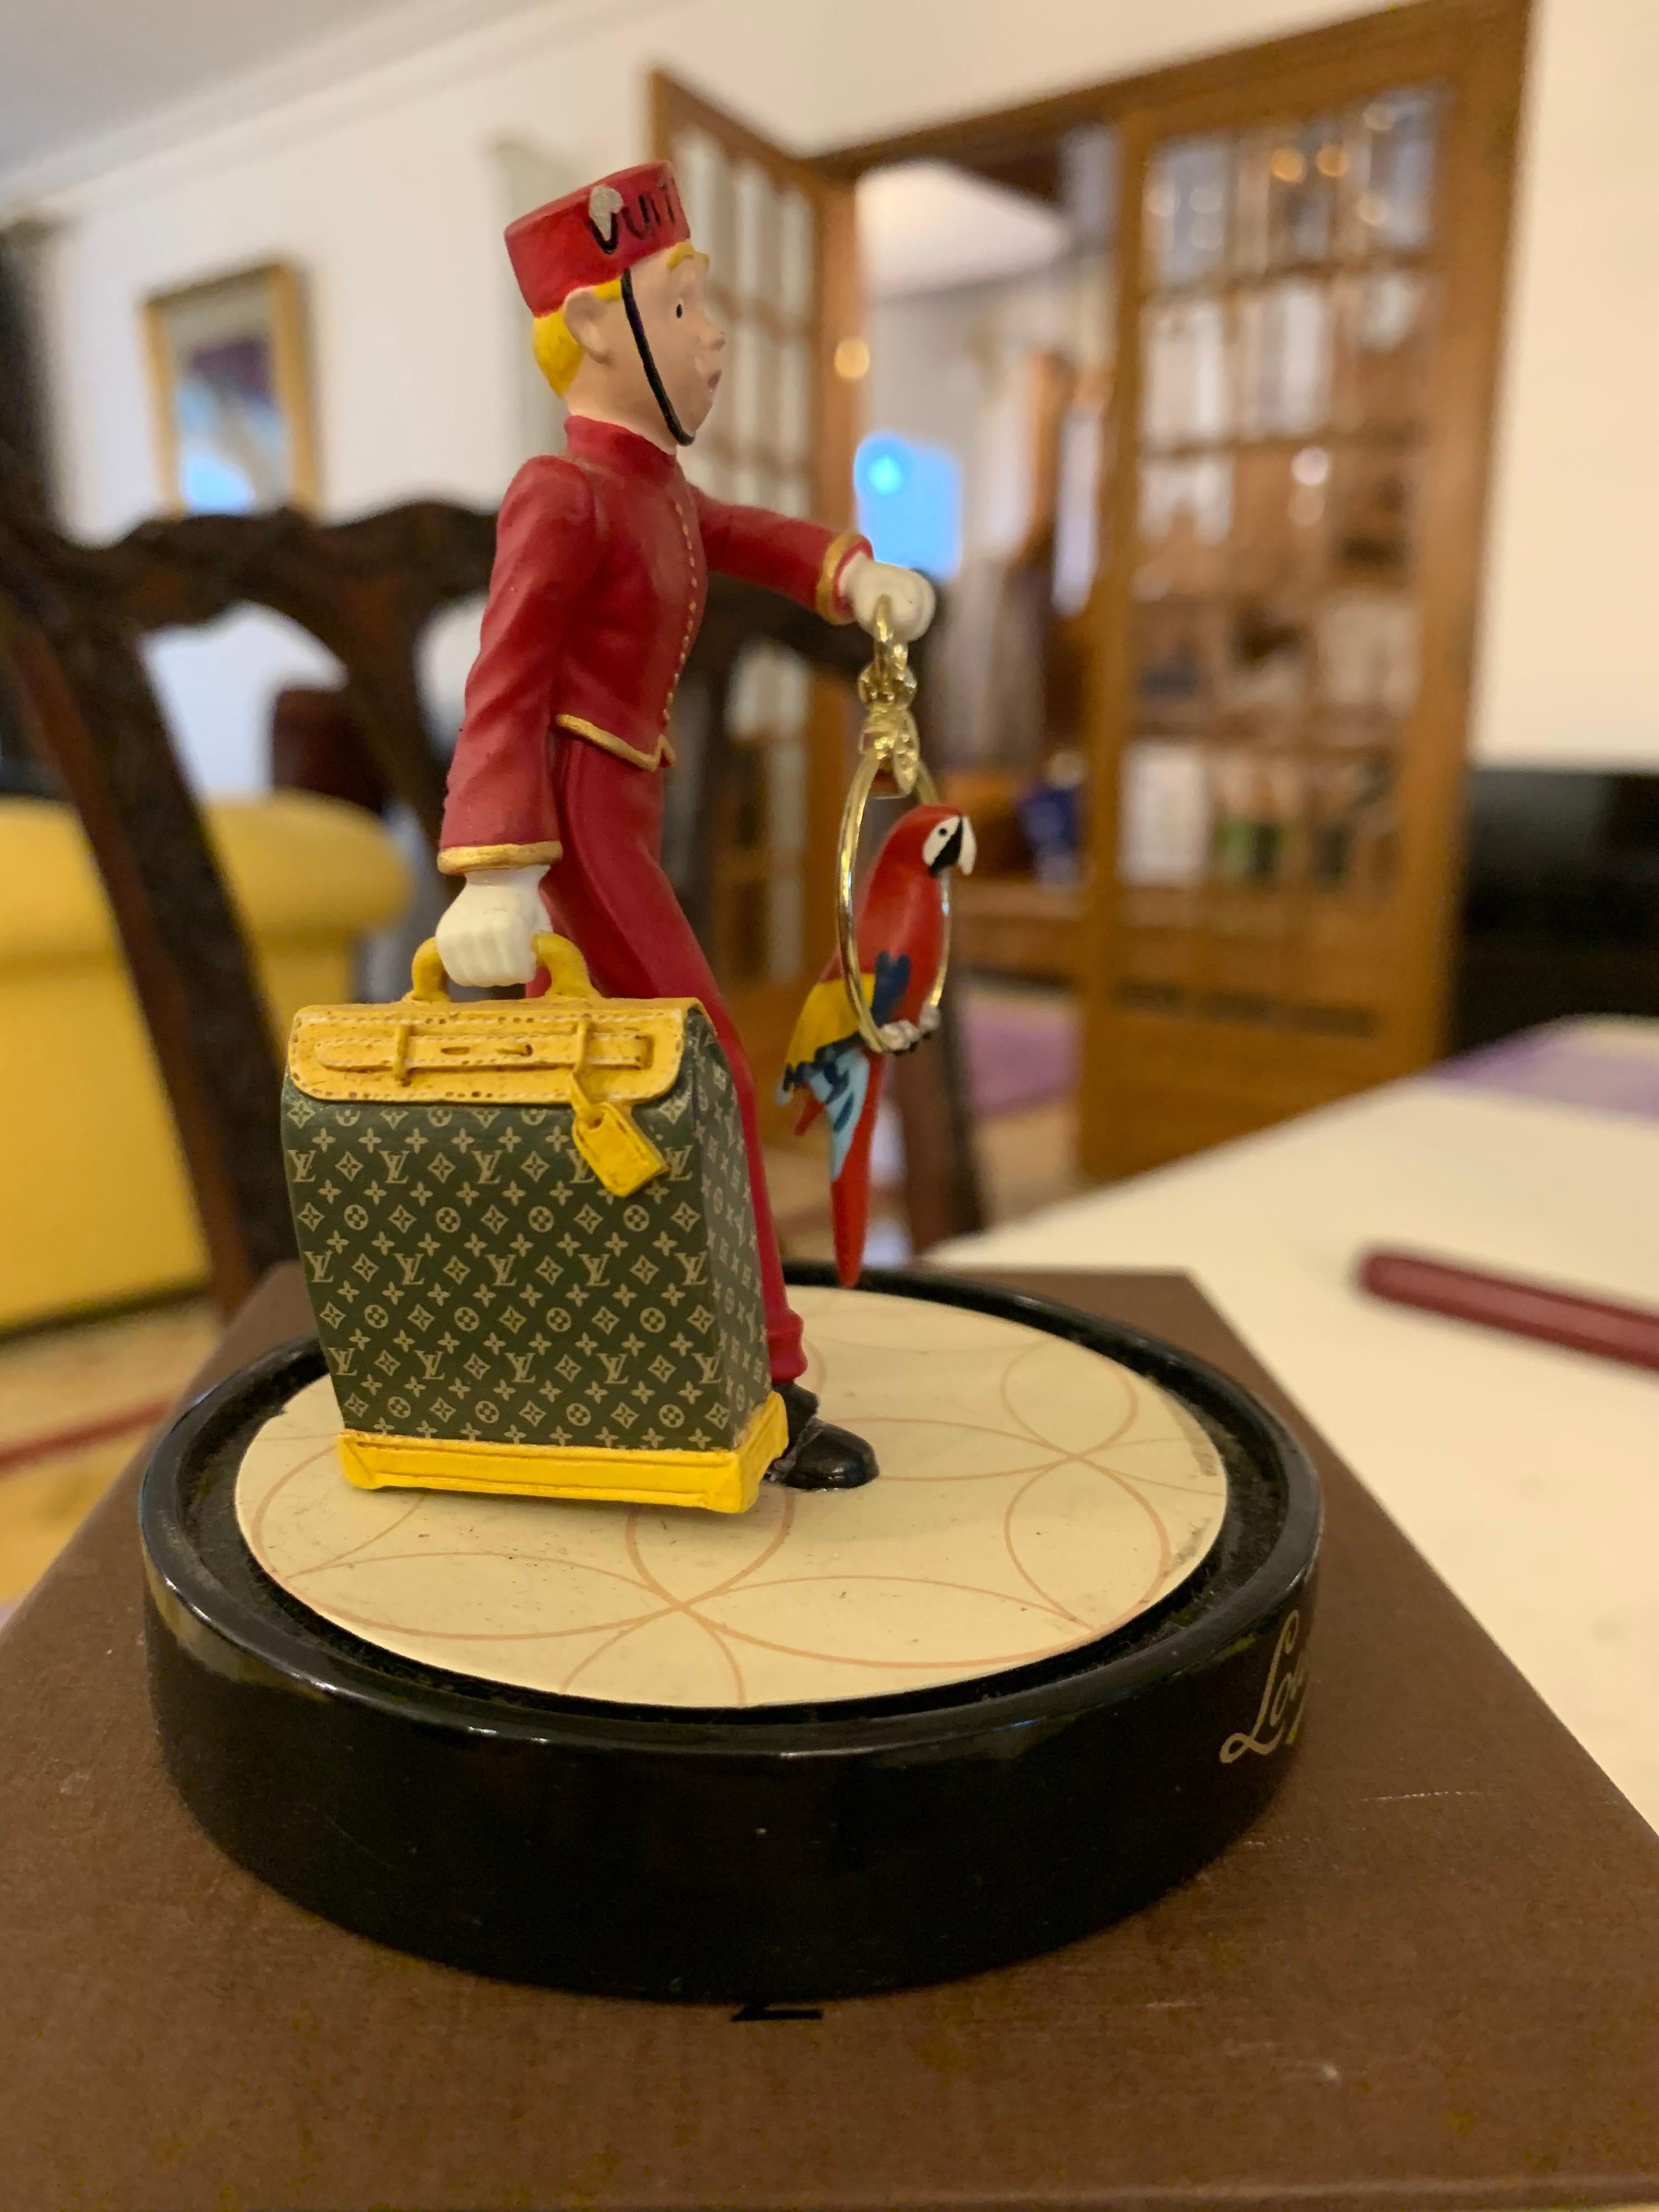 Rare limted edition of Louis Vuitton figurine called 